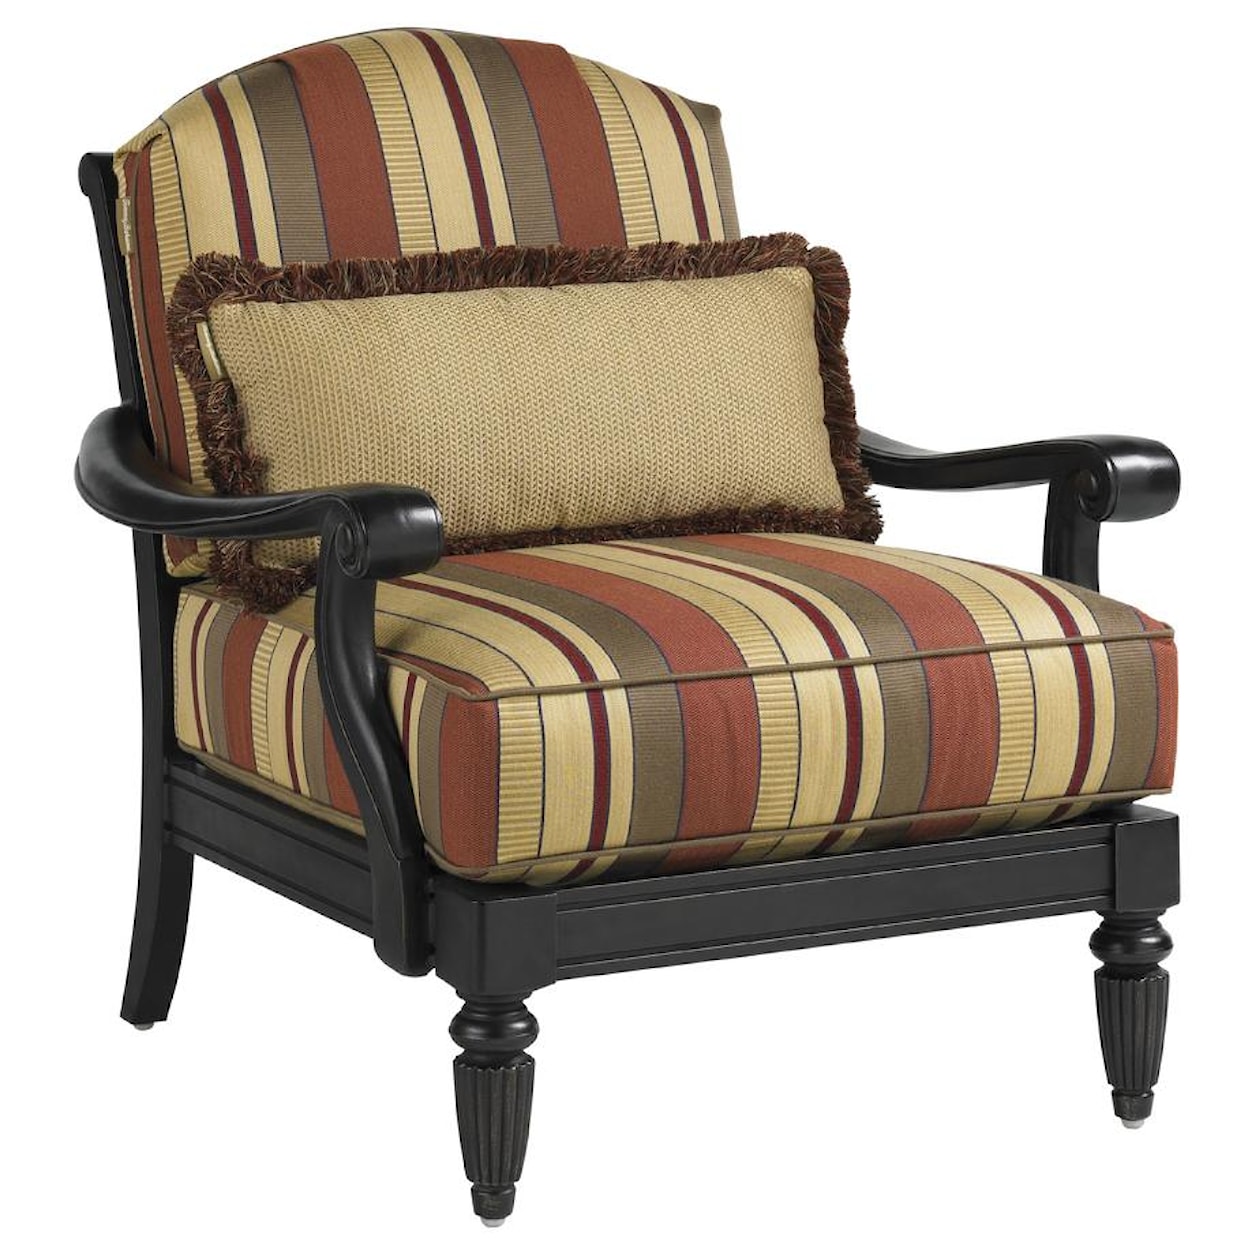 Tommy Bahama Outdoor Living Kingstown Sedona Lounge Chair